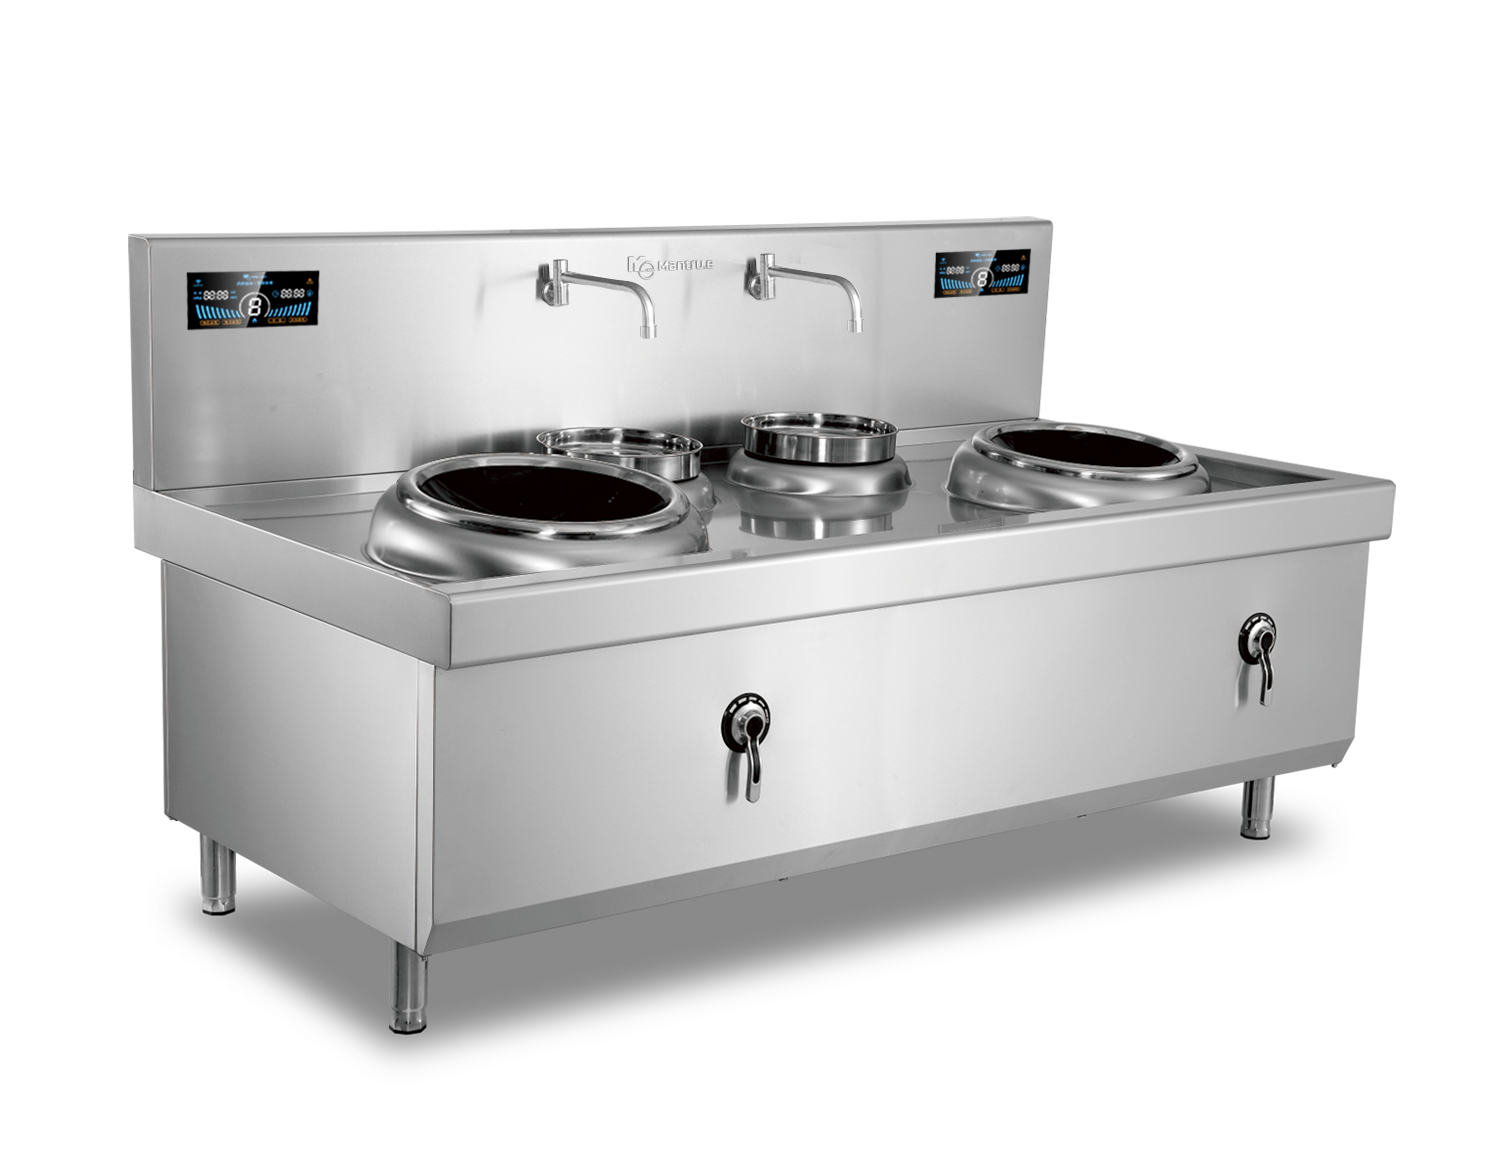 500mm Double Burner with double basin Induction Wok